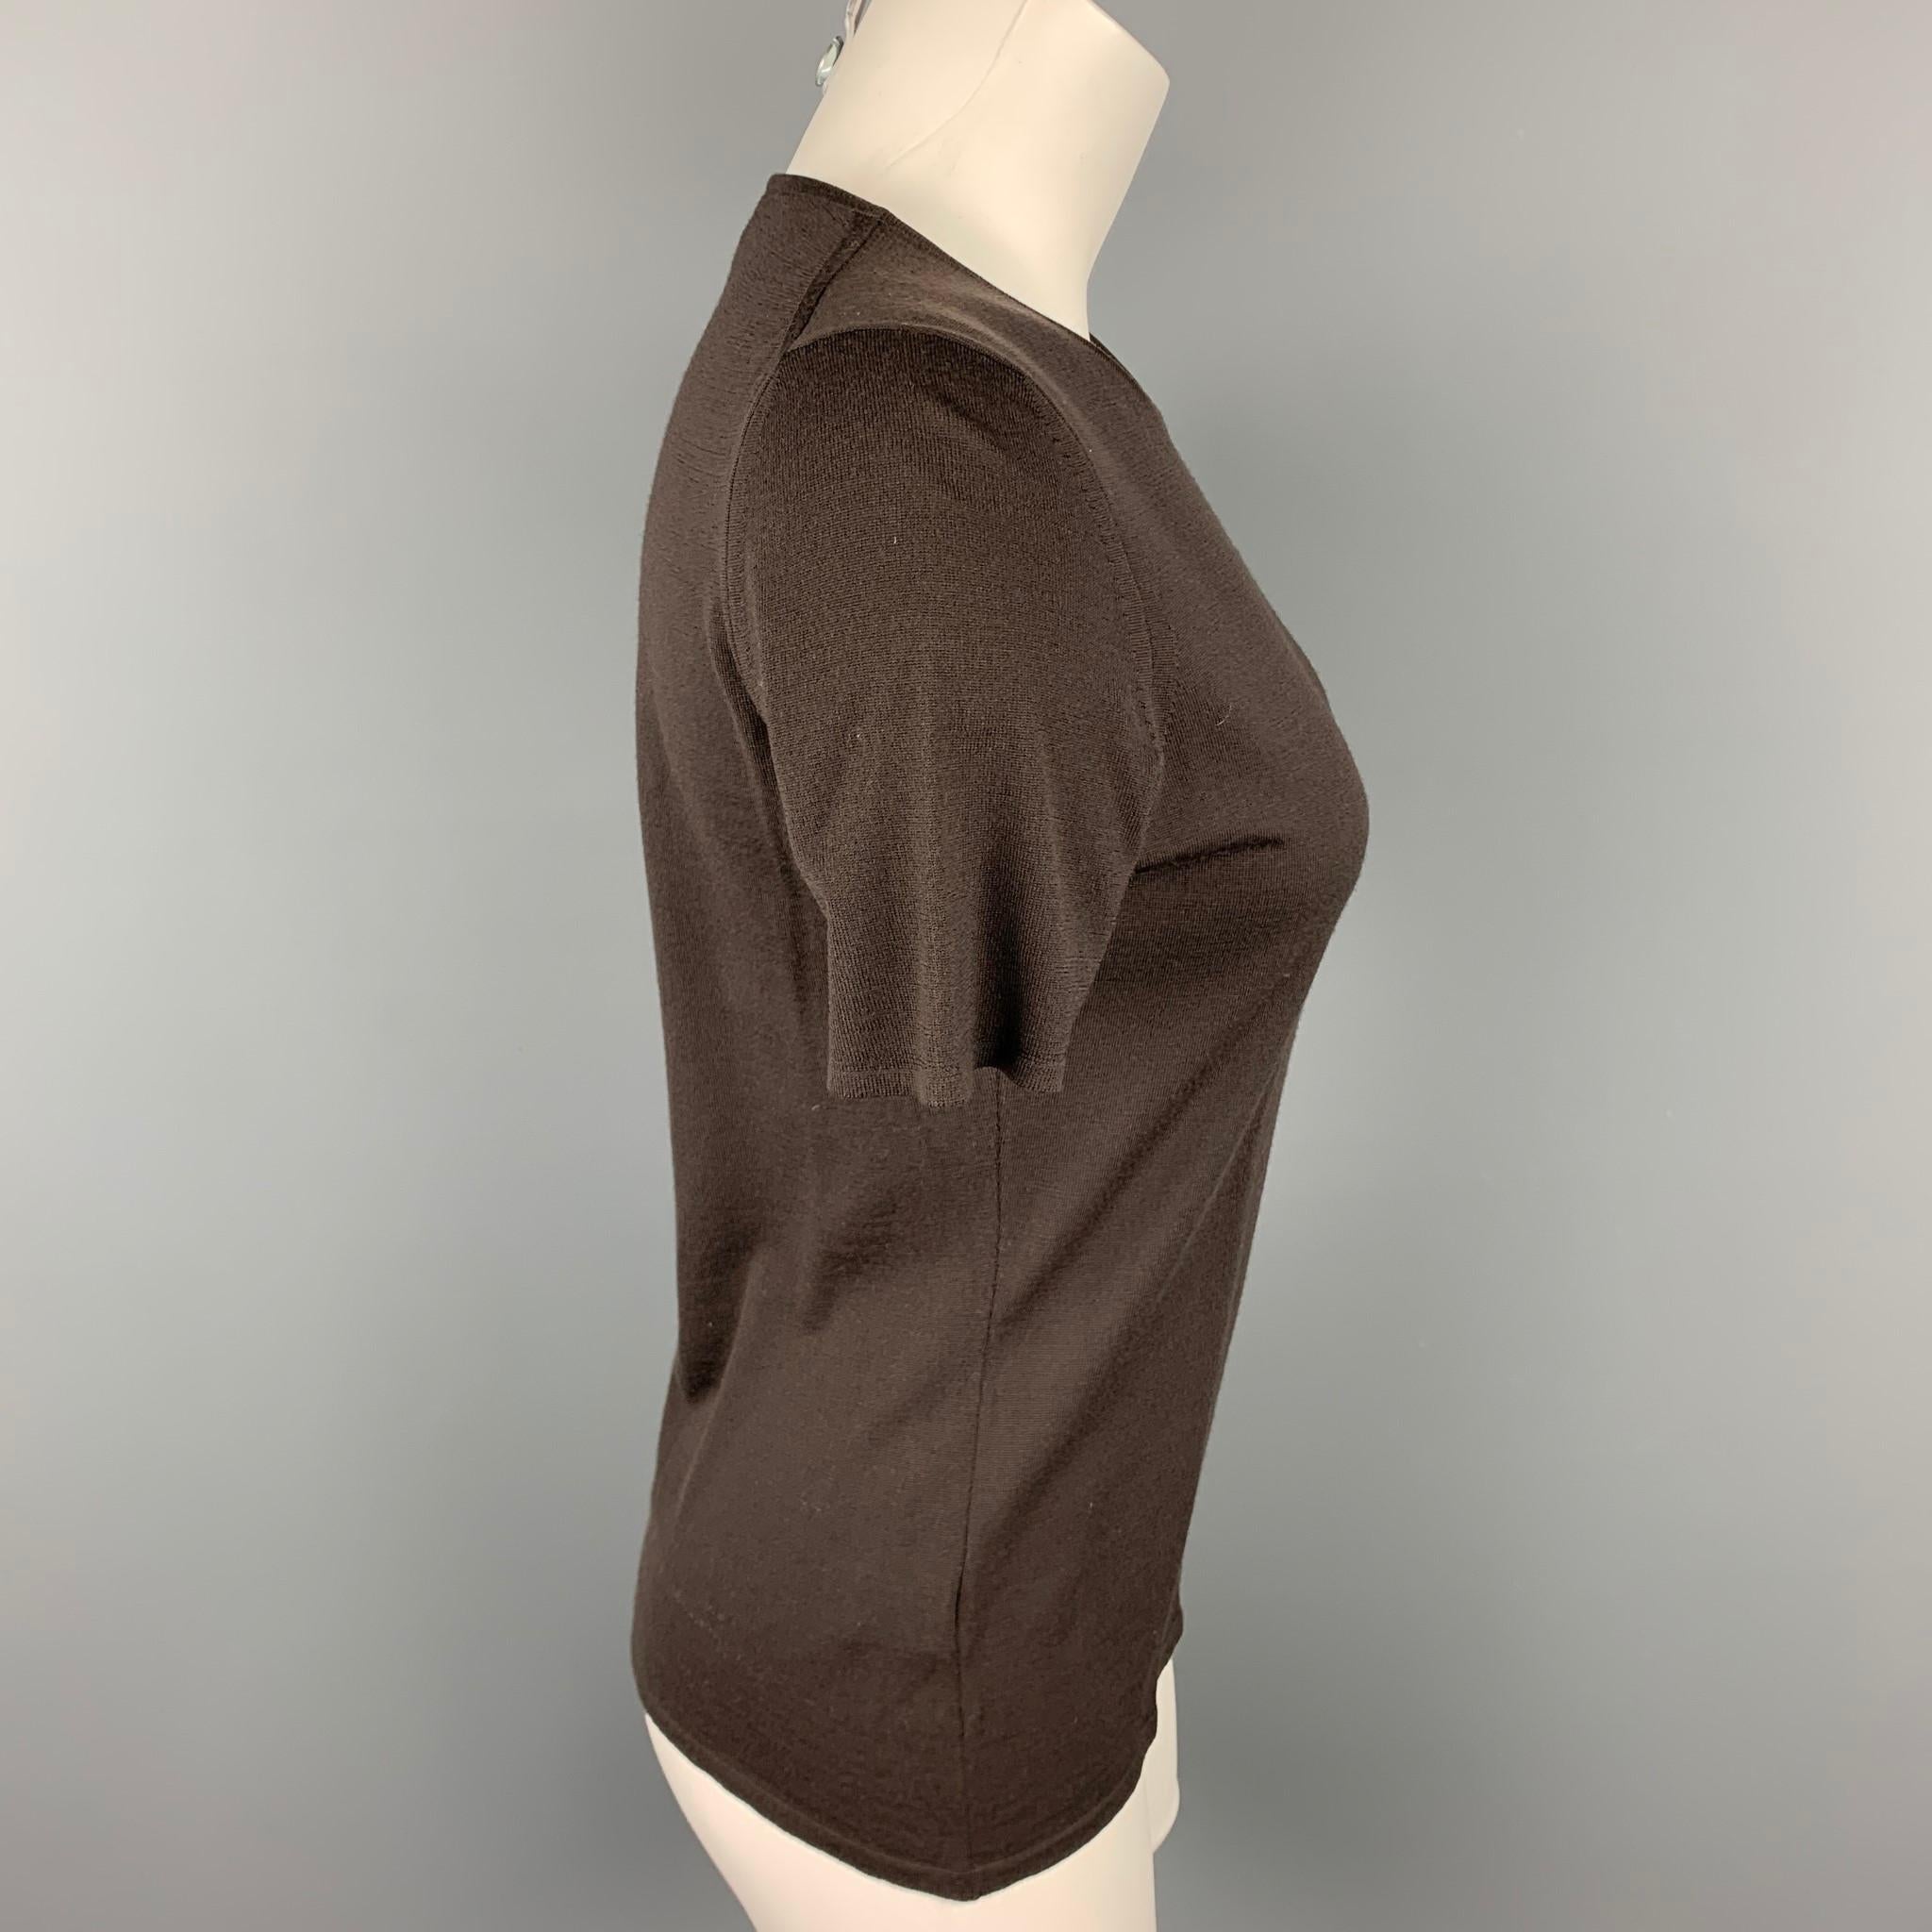 TSE short sleeve pullover comes in a brown knitted wool featuring a crew-neck. Cardigan sold separately. Made in Italy.

Very Good Pre-Owned Condition.
Marked: M

Measurements:

Shoulder: 15 in.
Bust: 35 in.
Sleeve: 9 in.
Length: 22 in. 